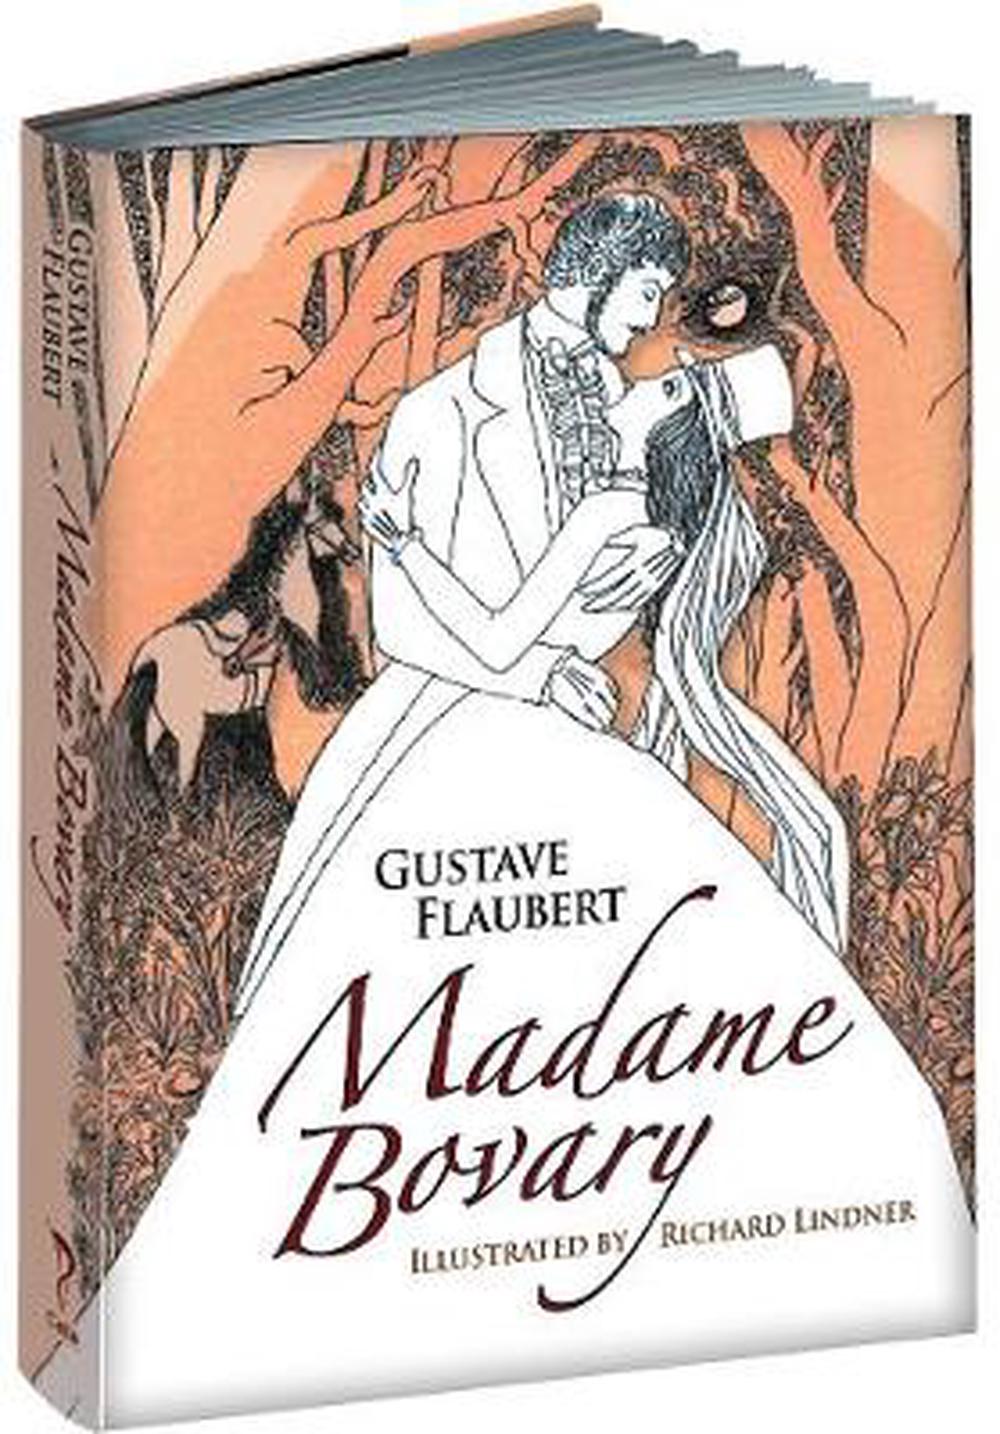 download the new version for iphoneMadame Bovary